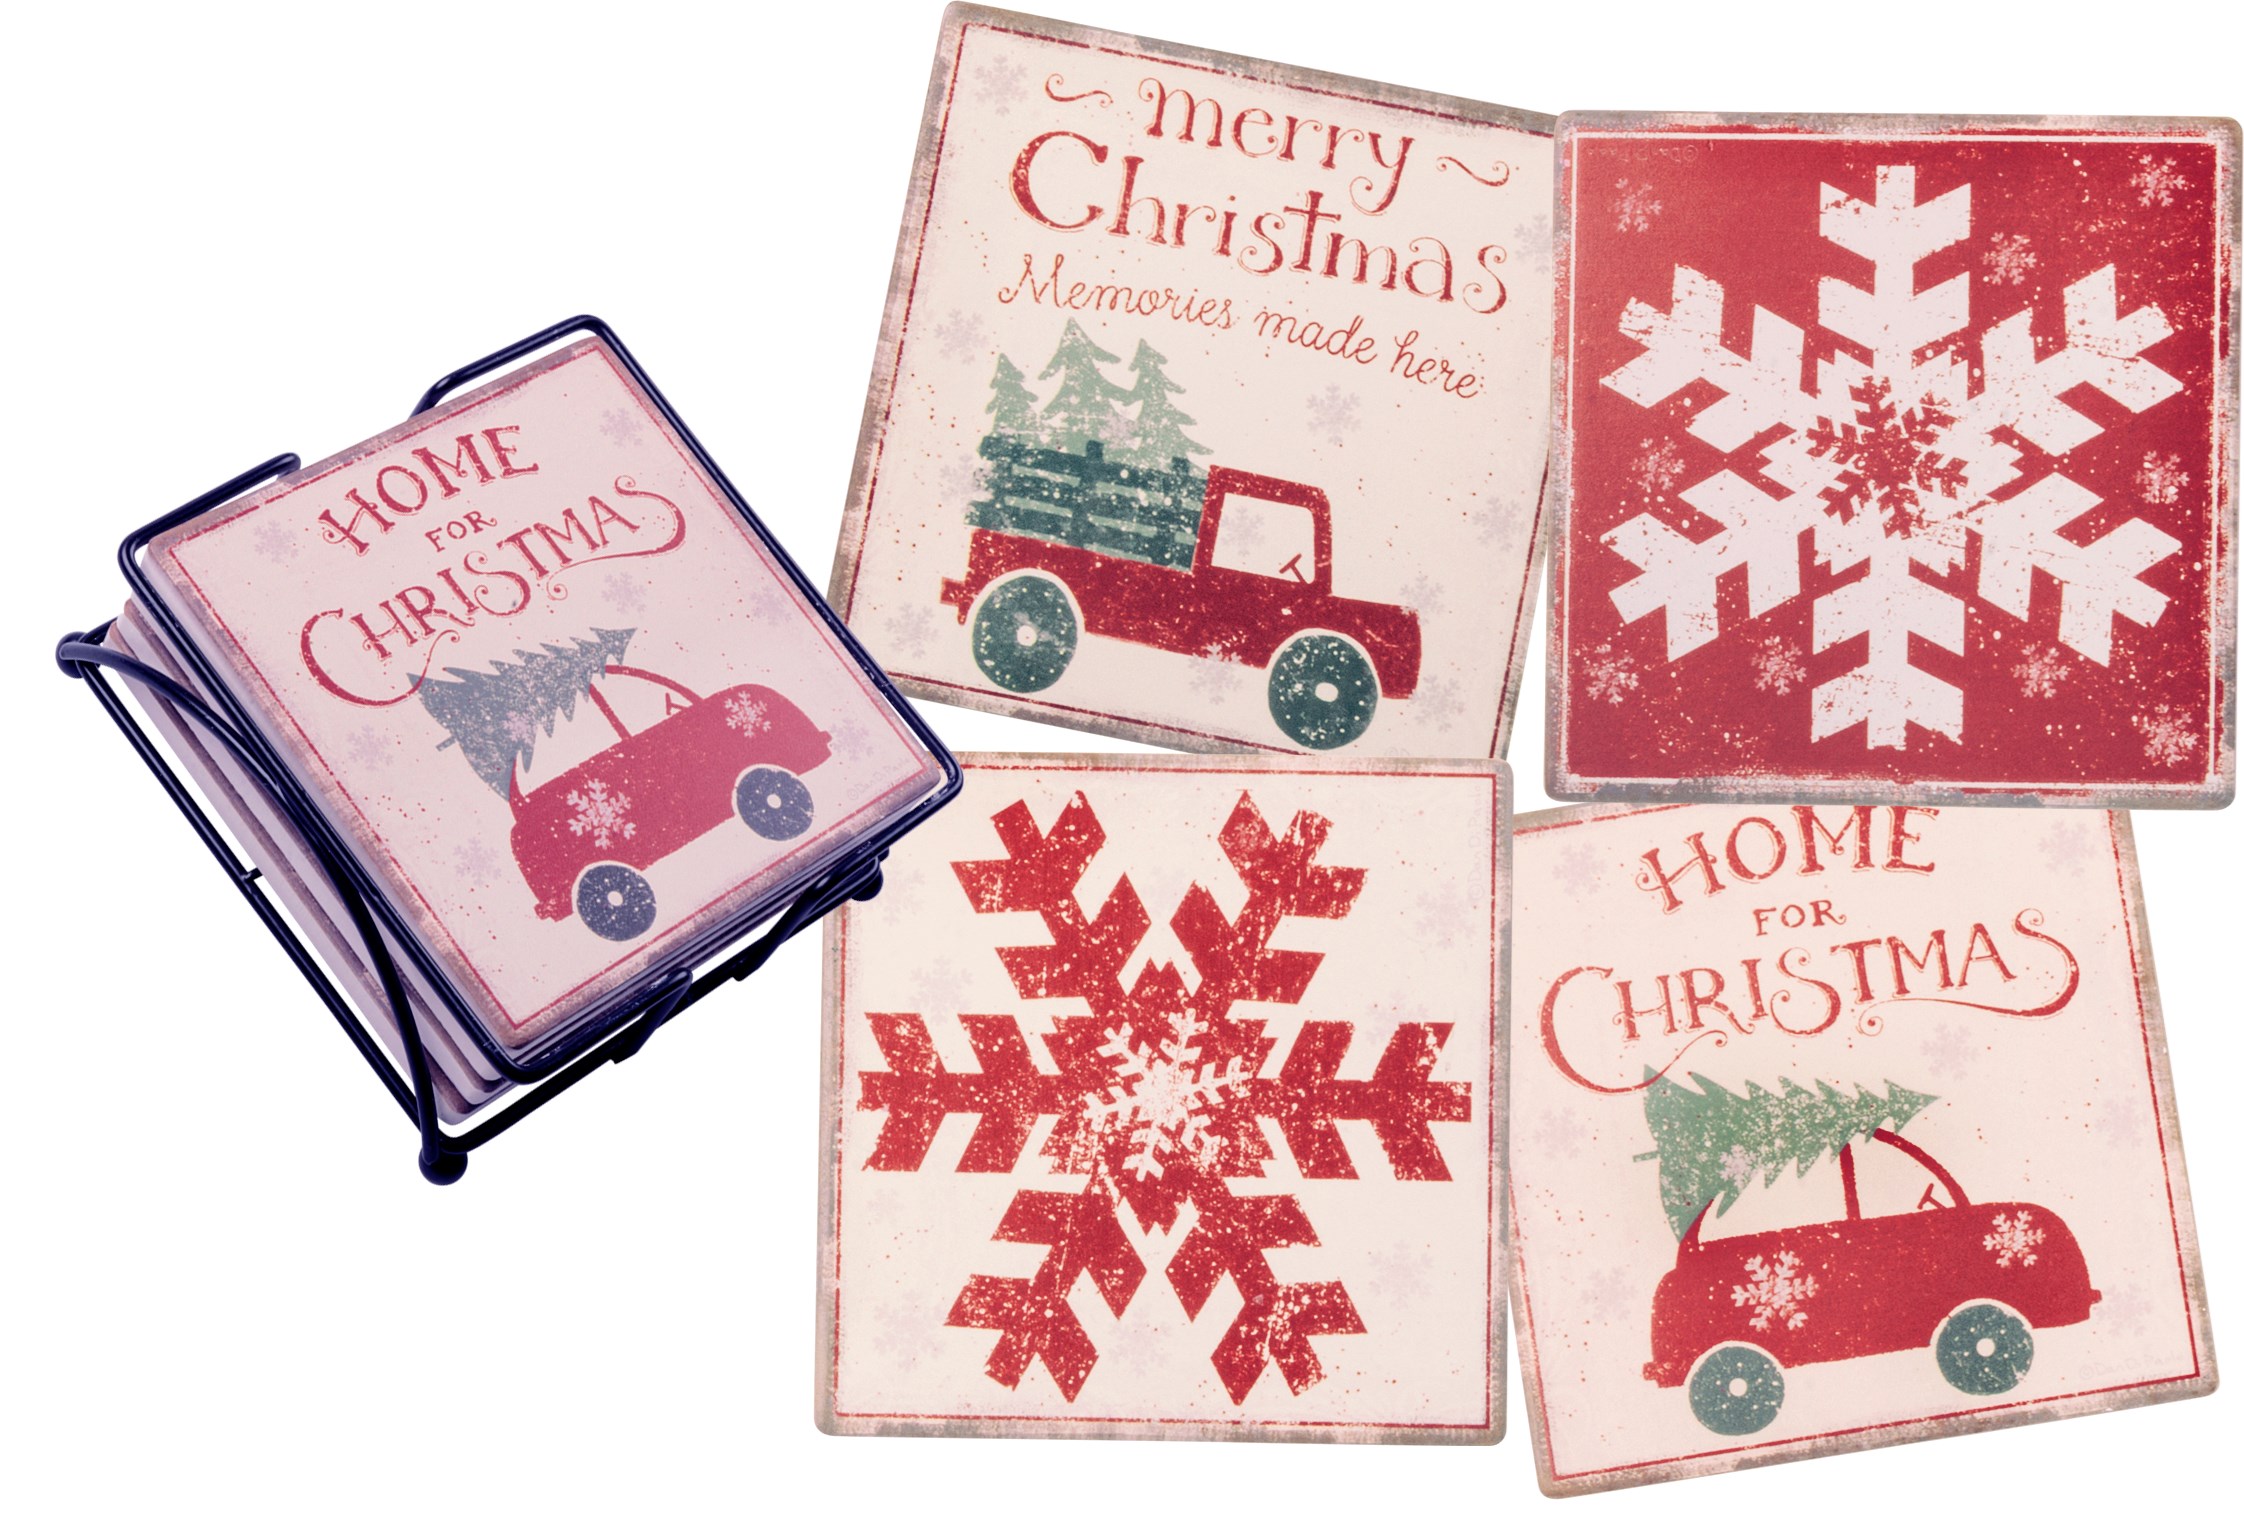 Home for Christmas 36087 Primitives by Kathy Stone Coasters 